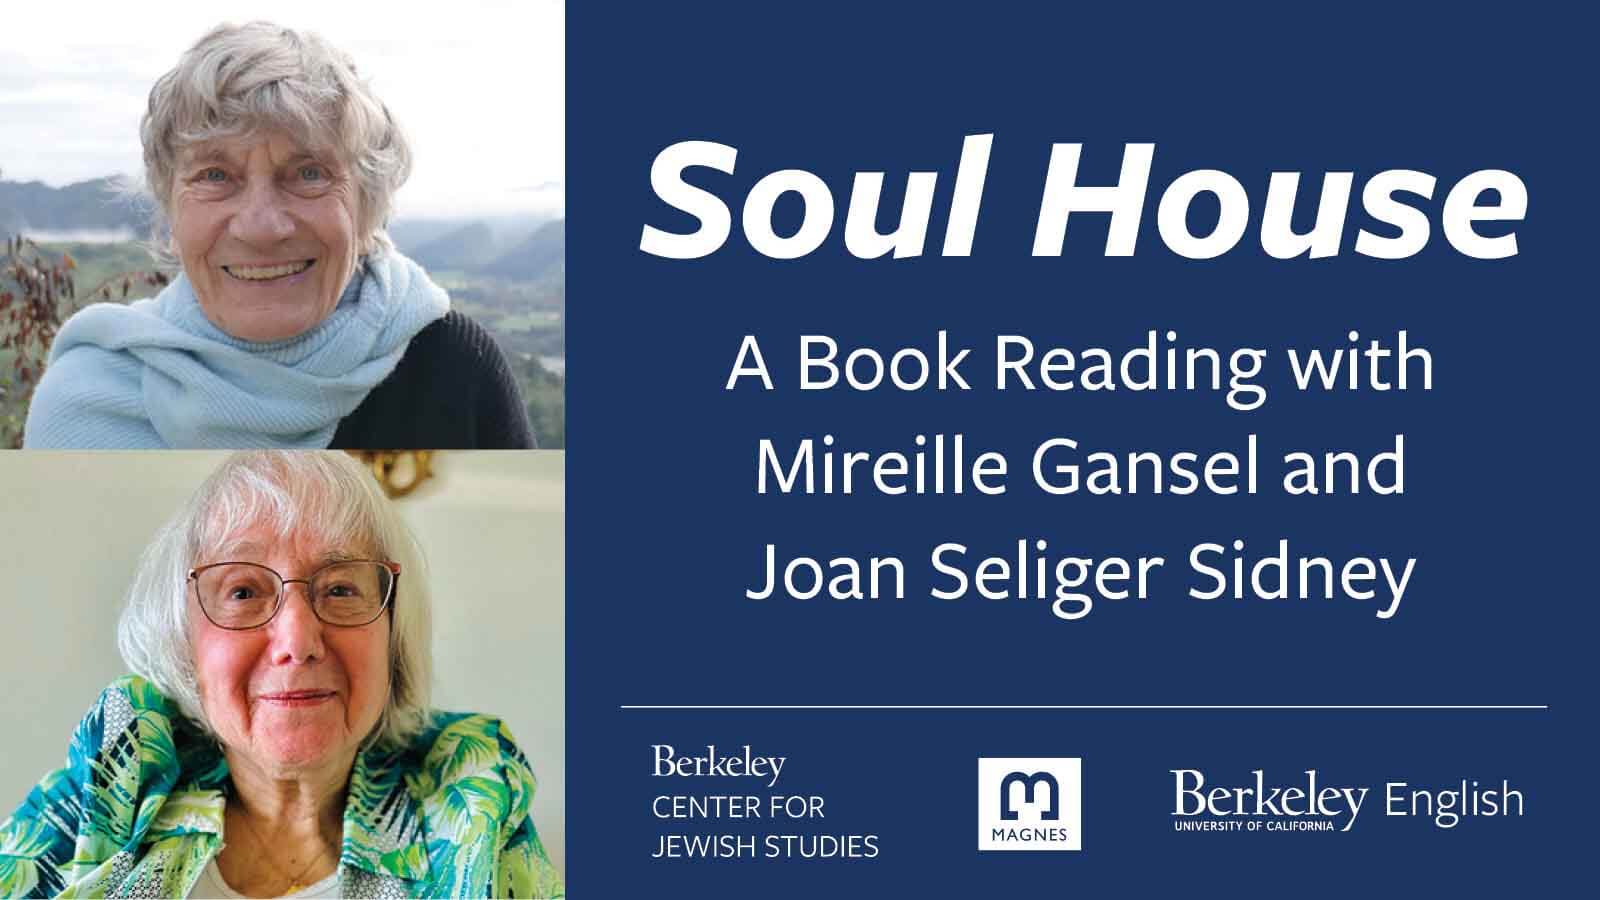 On left, 2 photos of older women. On right, dark blue background with type: Soul House A Book Reading with Mireille Gansel and Joan Seliger Sidney and logos for Berkeley Center for Jewish Studies, the Magnes, and UC Berkeley English